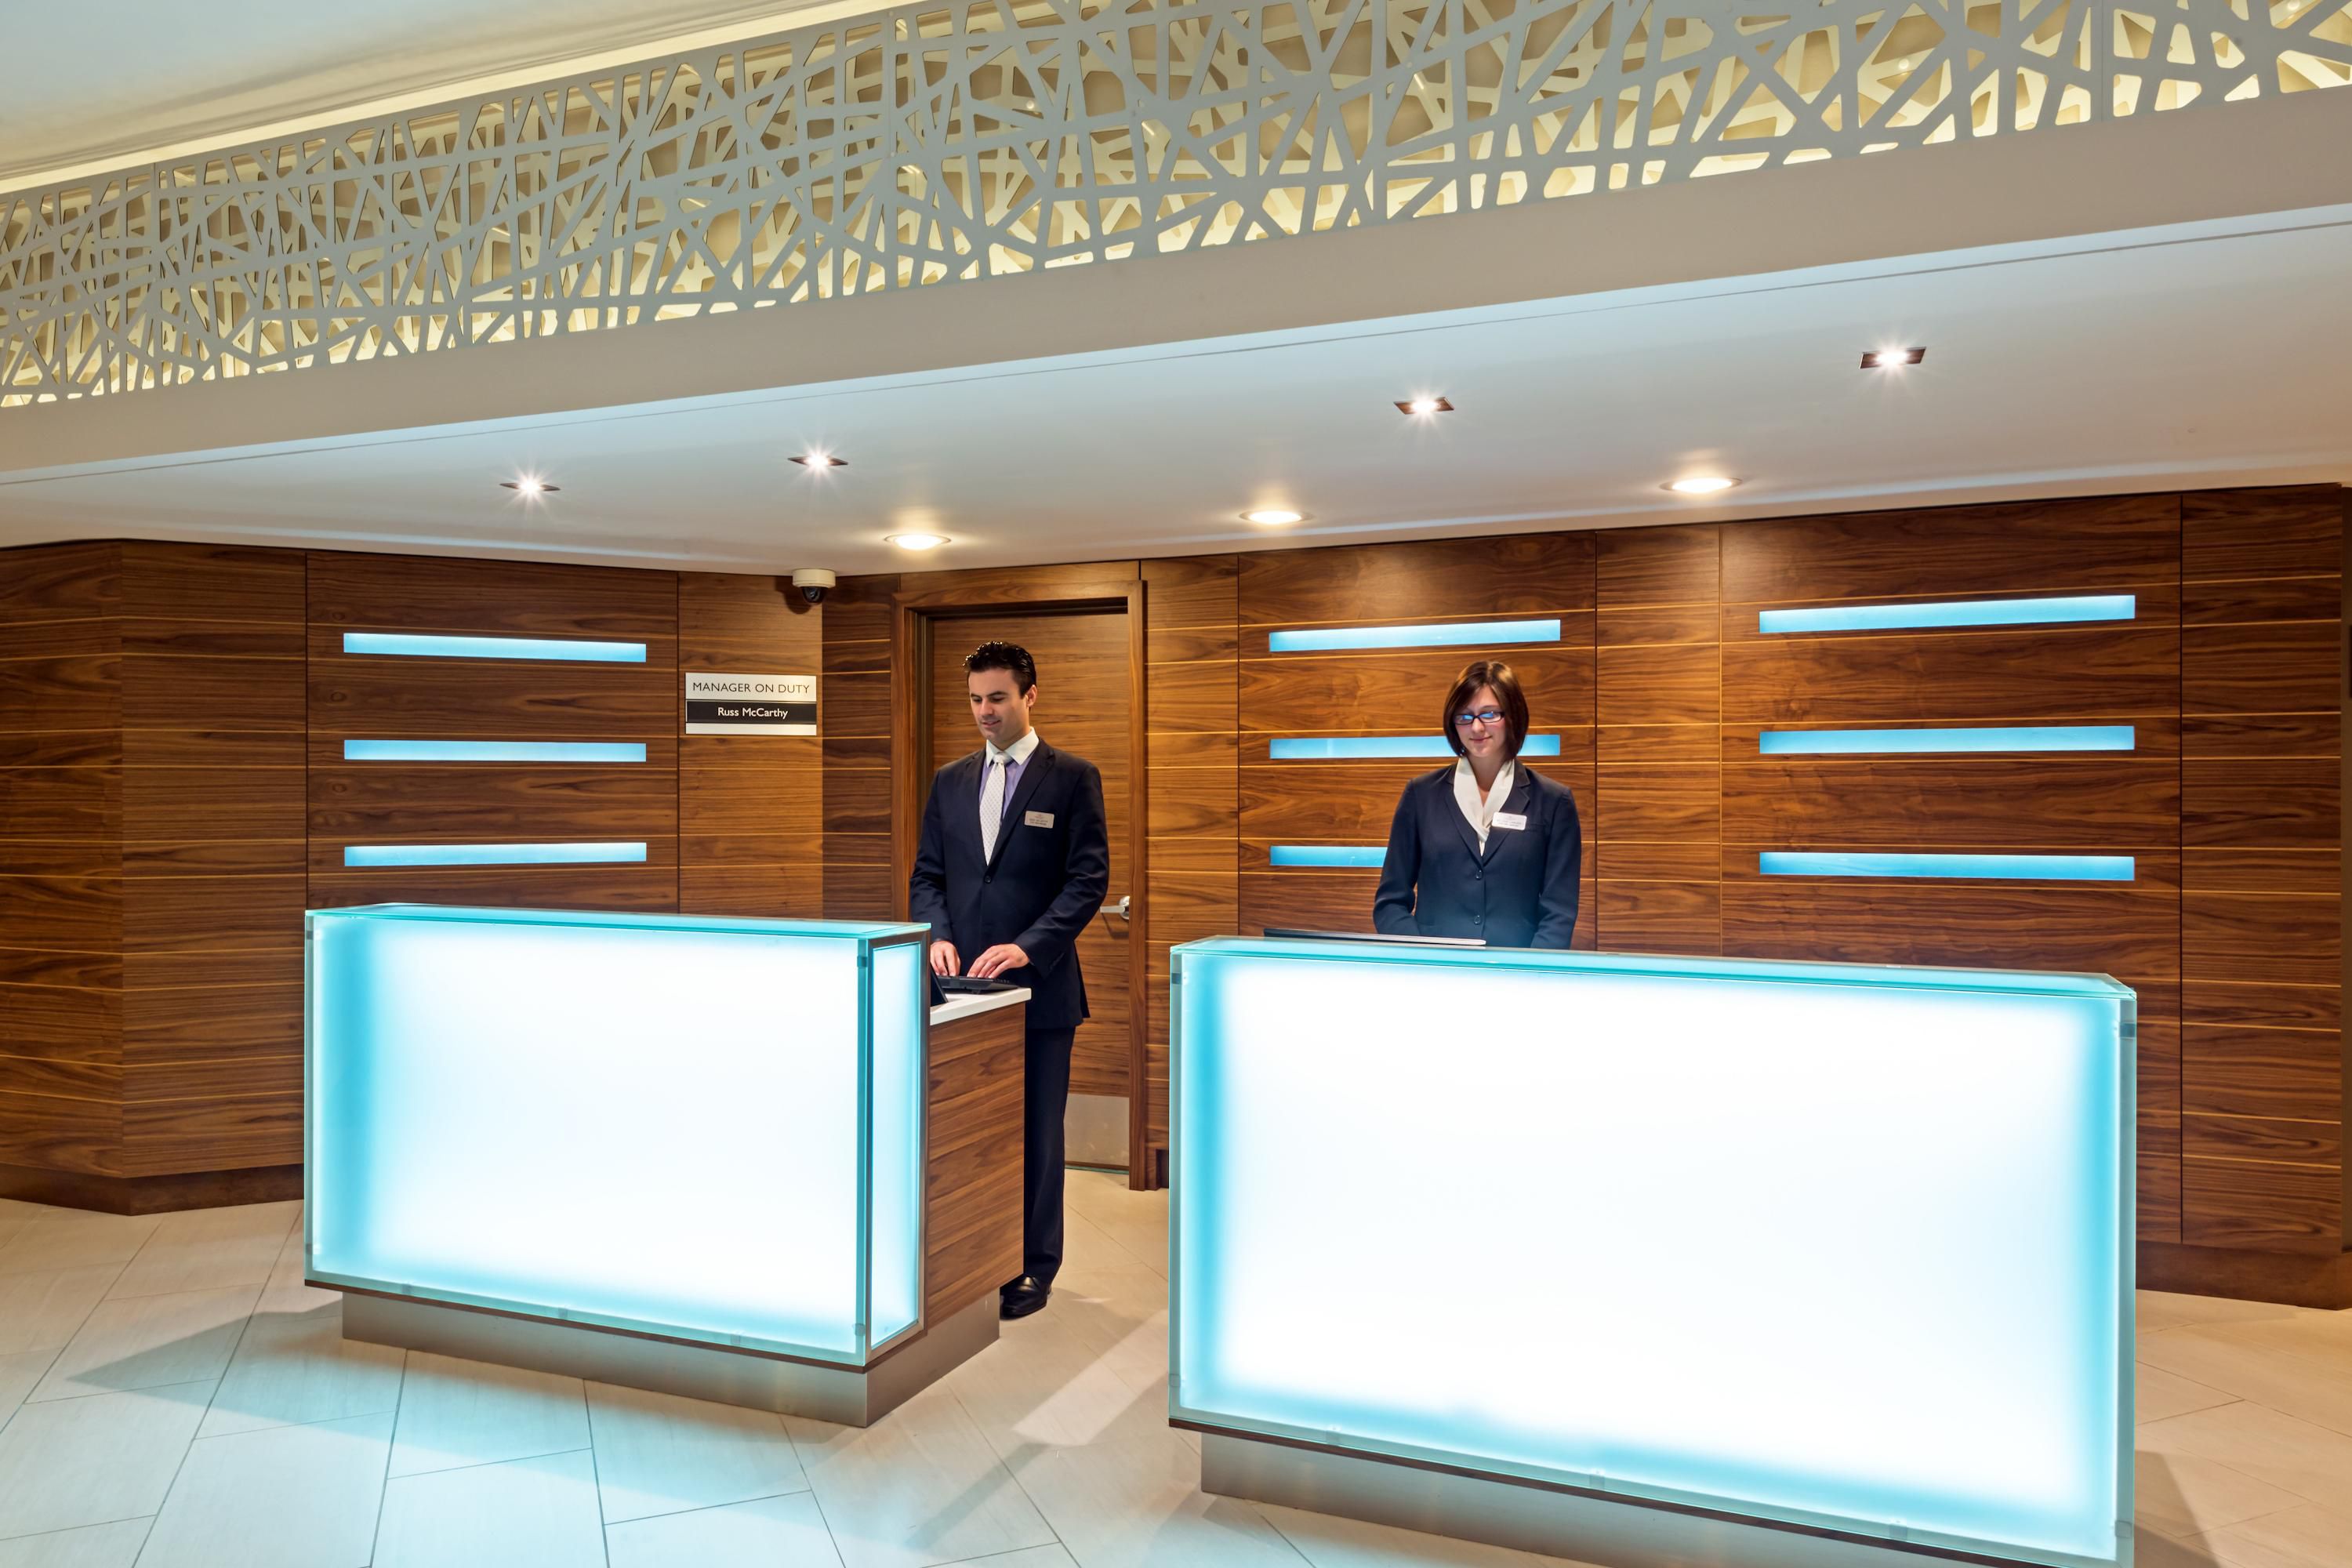 Knowledgeable staff to ensure your successful travel at the Crowne